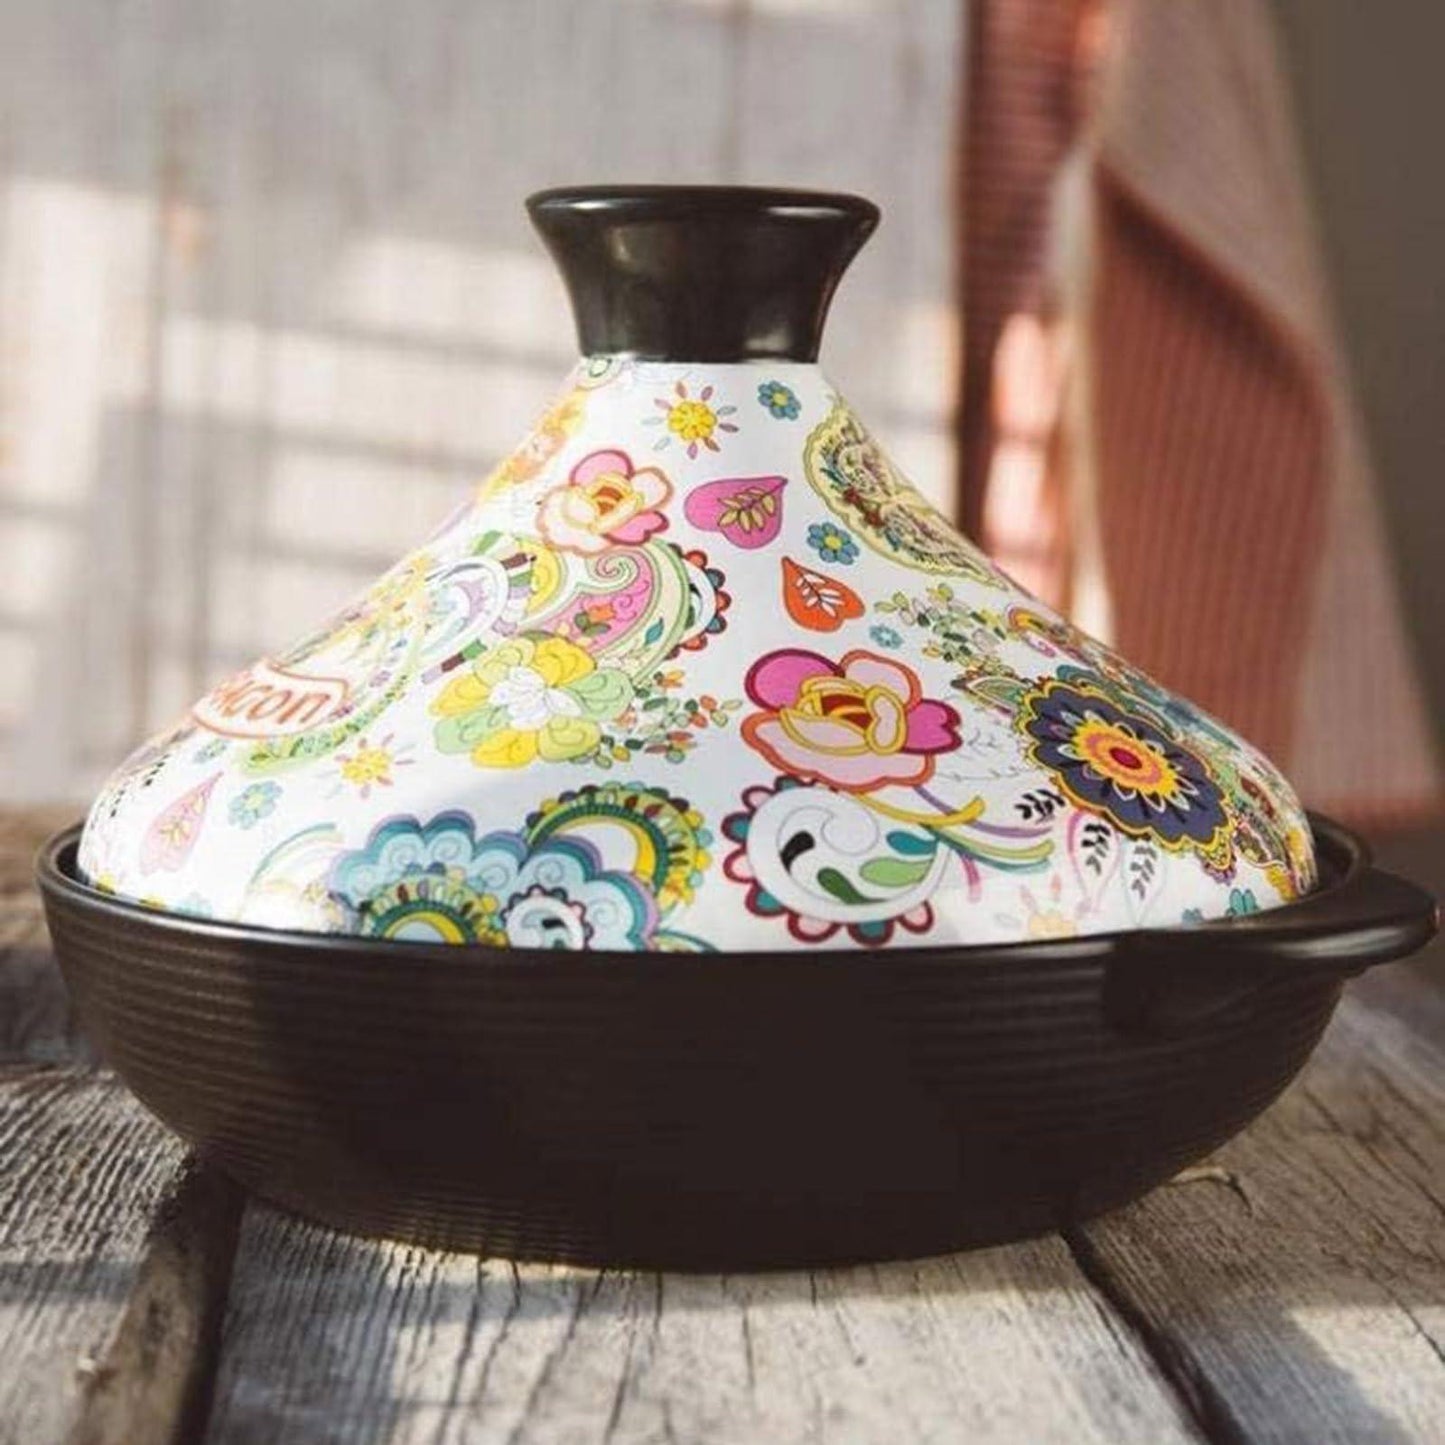 Moroccan Tagine Pot Ceramic Tagine Pot Moroccan for Cooking with Ceramic Cone-Shaped Closed Lid Ceramic Cooker Pot for Cooking and Stew Casserole Slow Cooker - CookCave